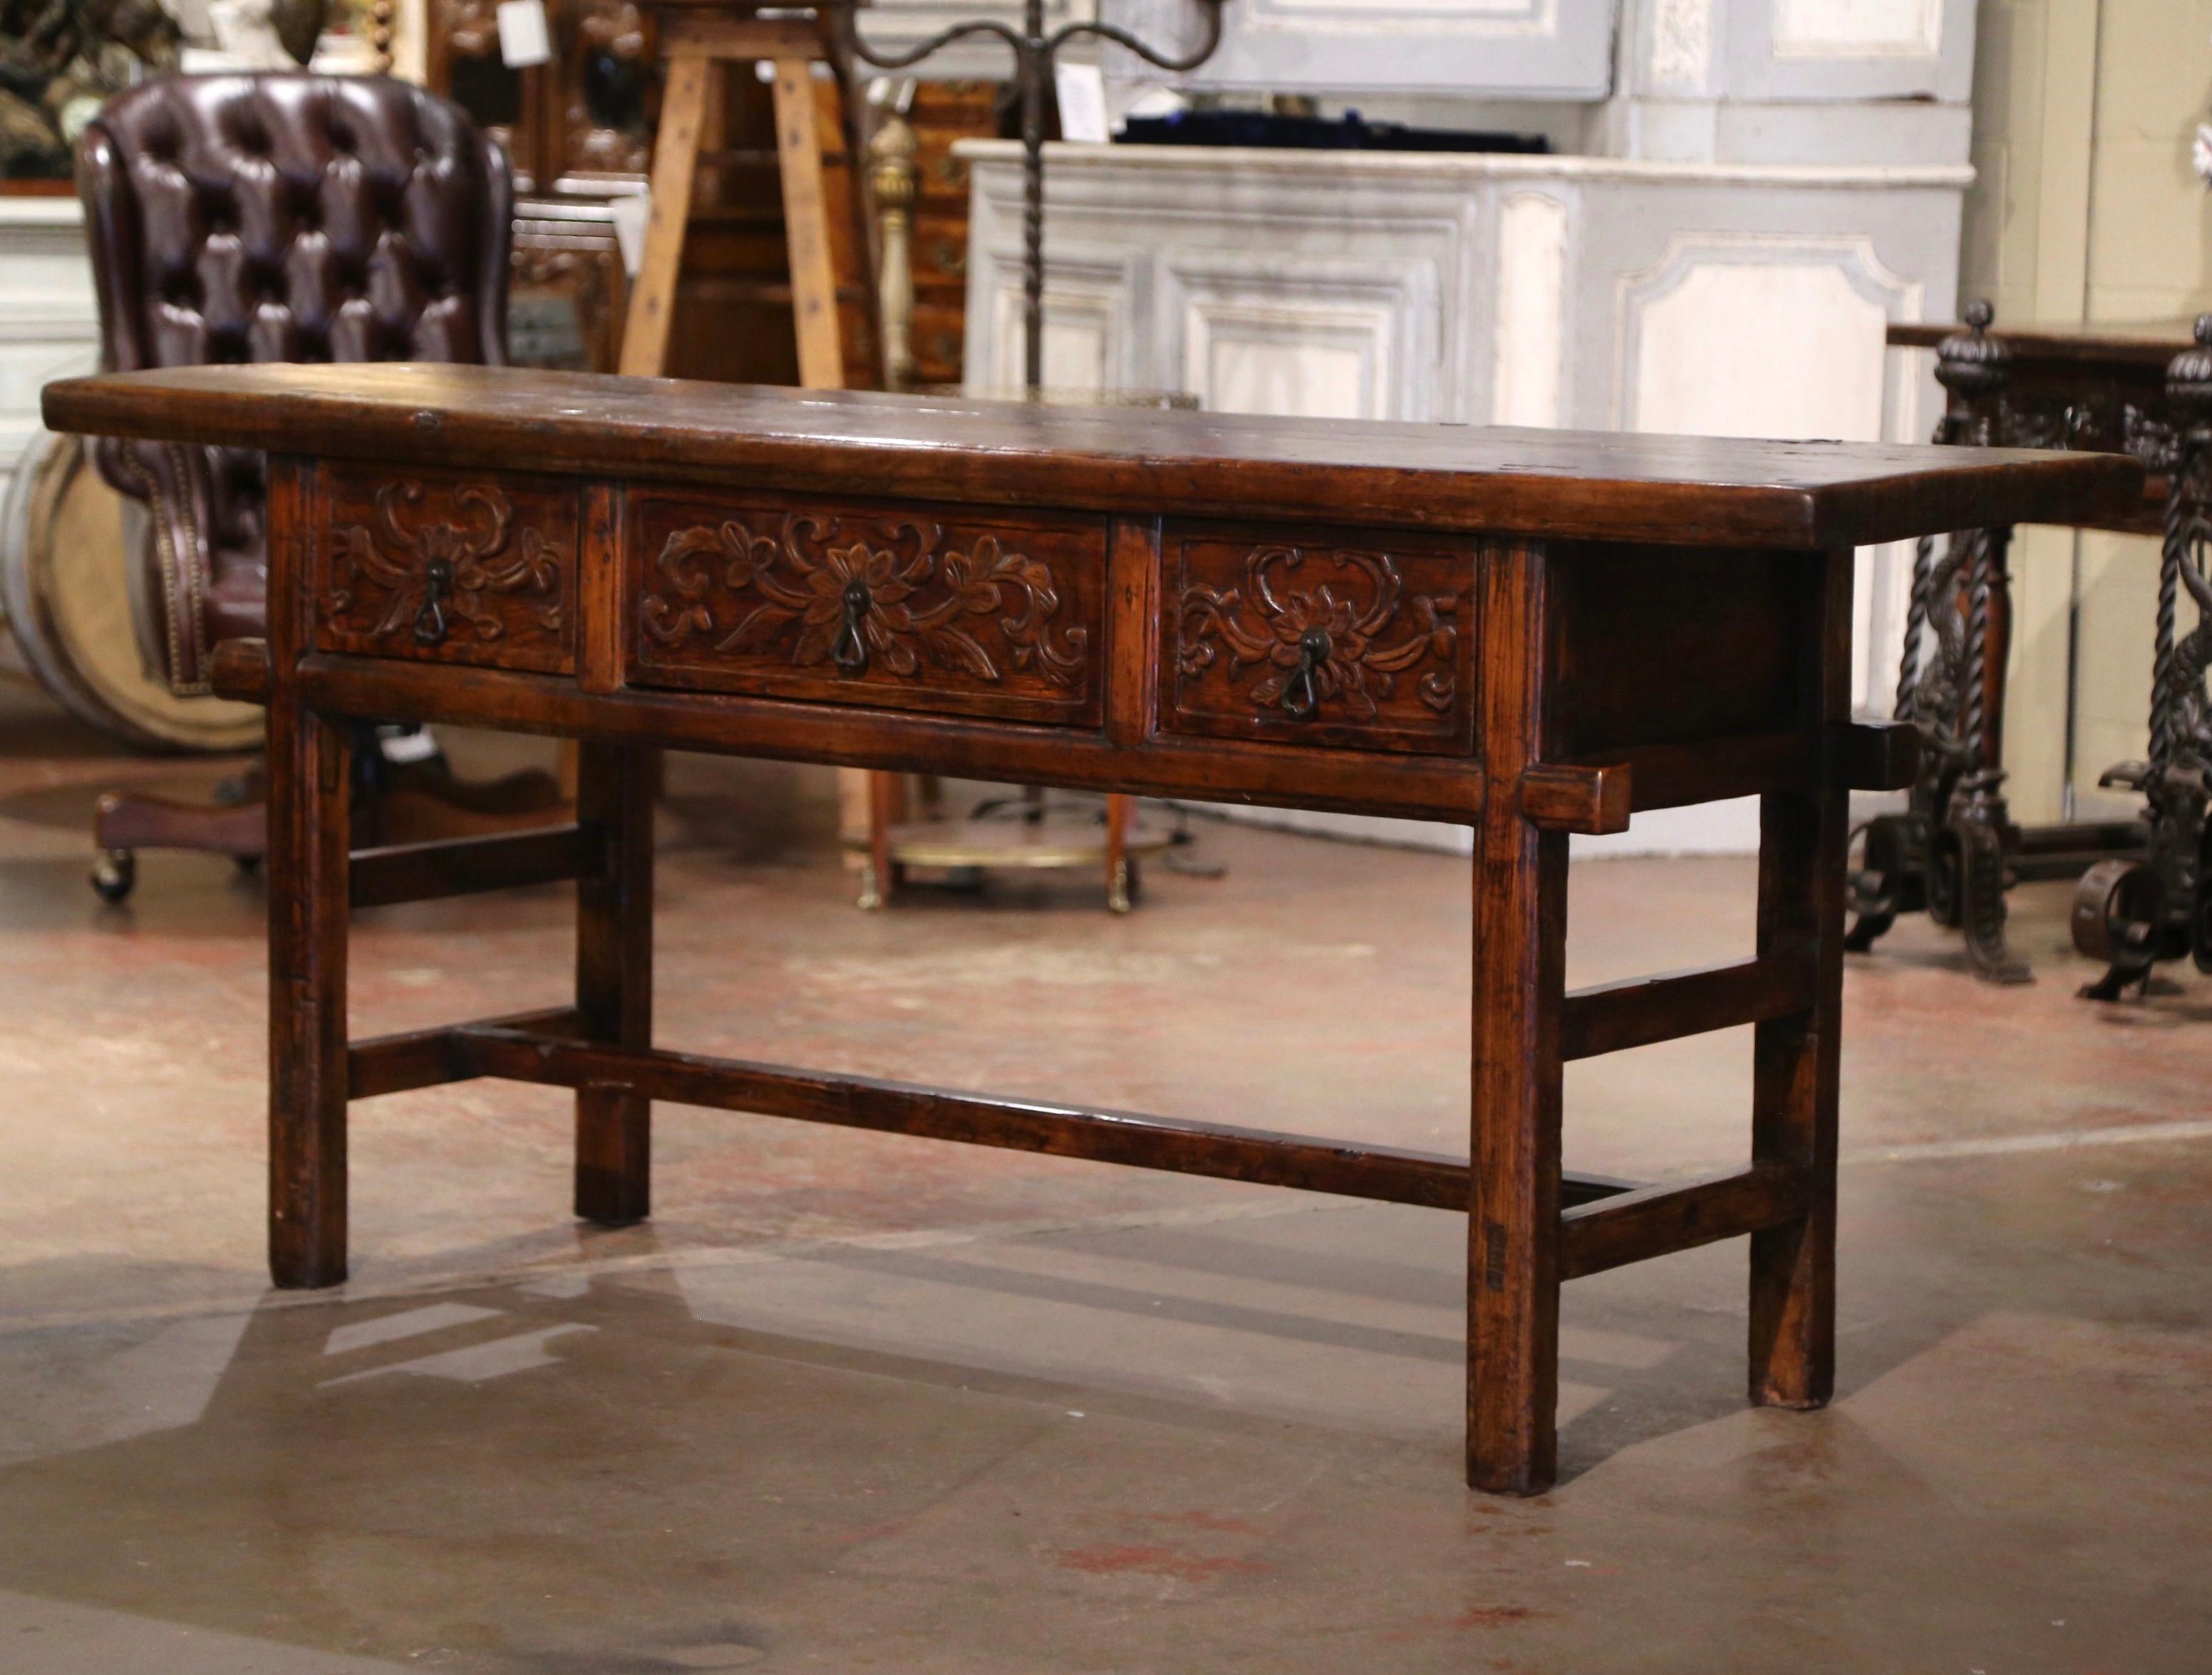 Place this elegant antique console table behind a sofa or against a wall. Crafted in Spain circa 1970 and built of oak and pine, the Baroque sofa table sits on square legs connected with a single bottom stretcher; the table features three hand